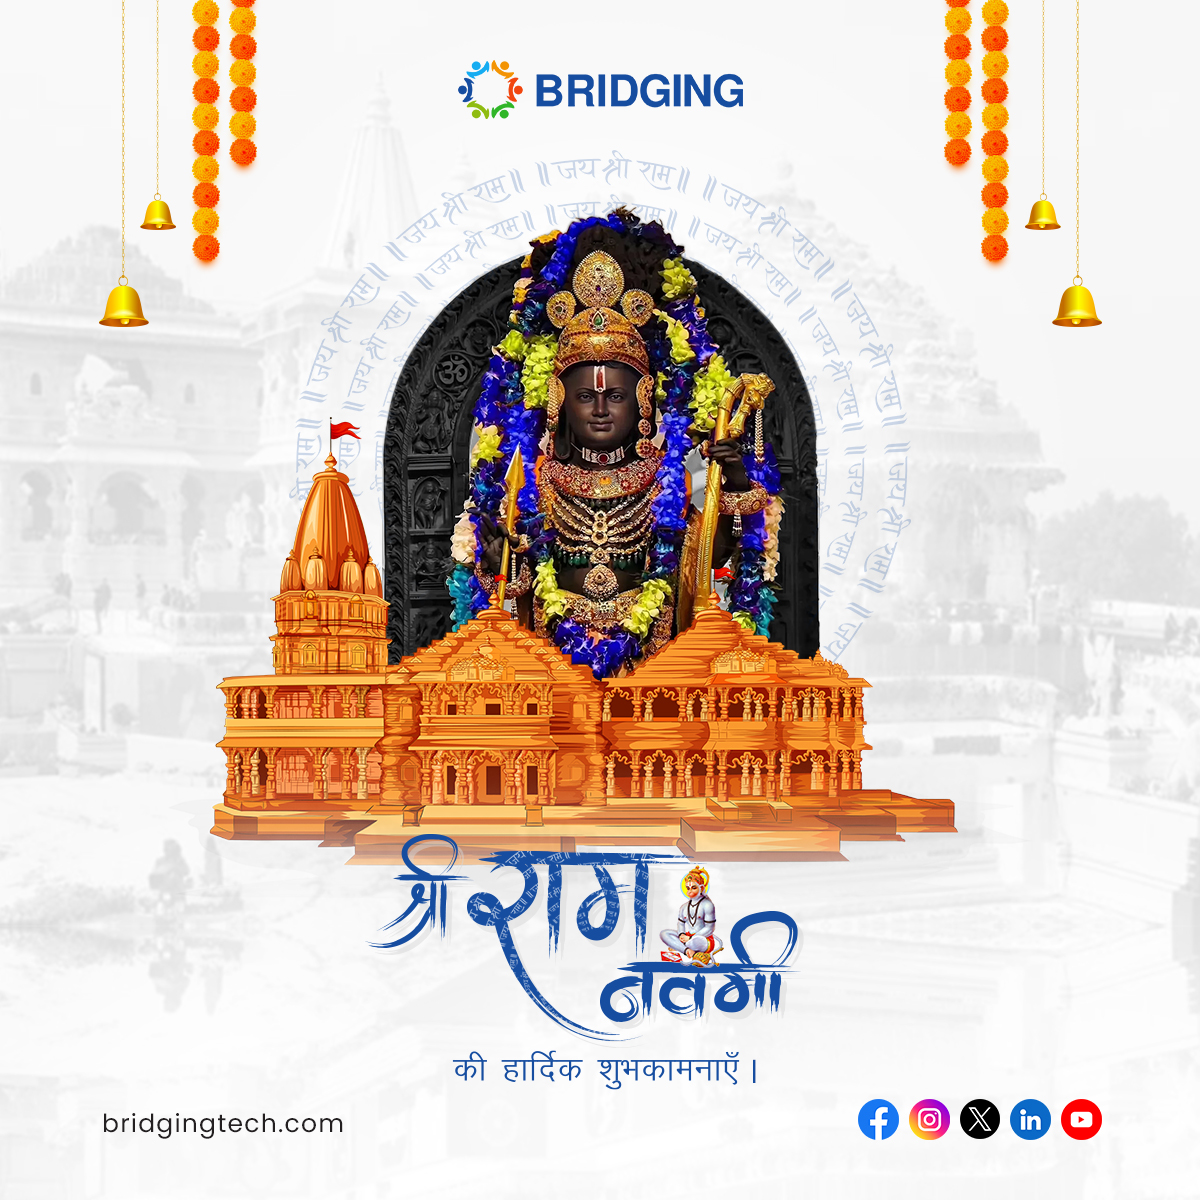 On the auspicious occasion of Ram Navami, may you be blessed with courage, strength, and wisdom to overcome all obstacles. 🙏 #bridgingtechnologies #RamNavami2024 #RamNavamiCelebration #LordRama #RamNavamiPuja #DivineCelebration #RamNavami